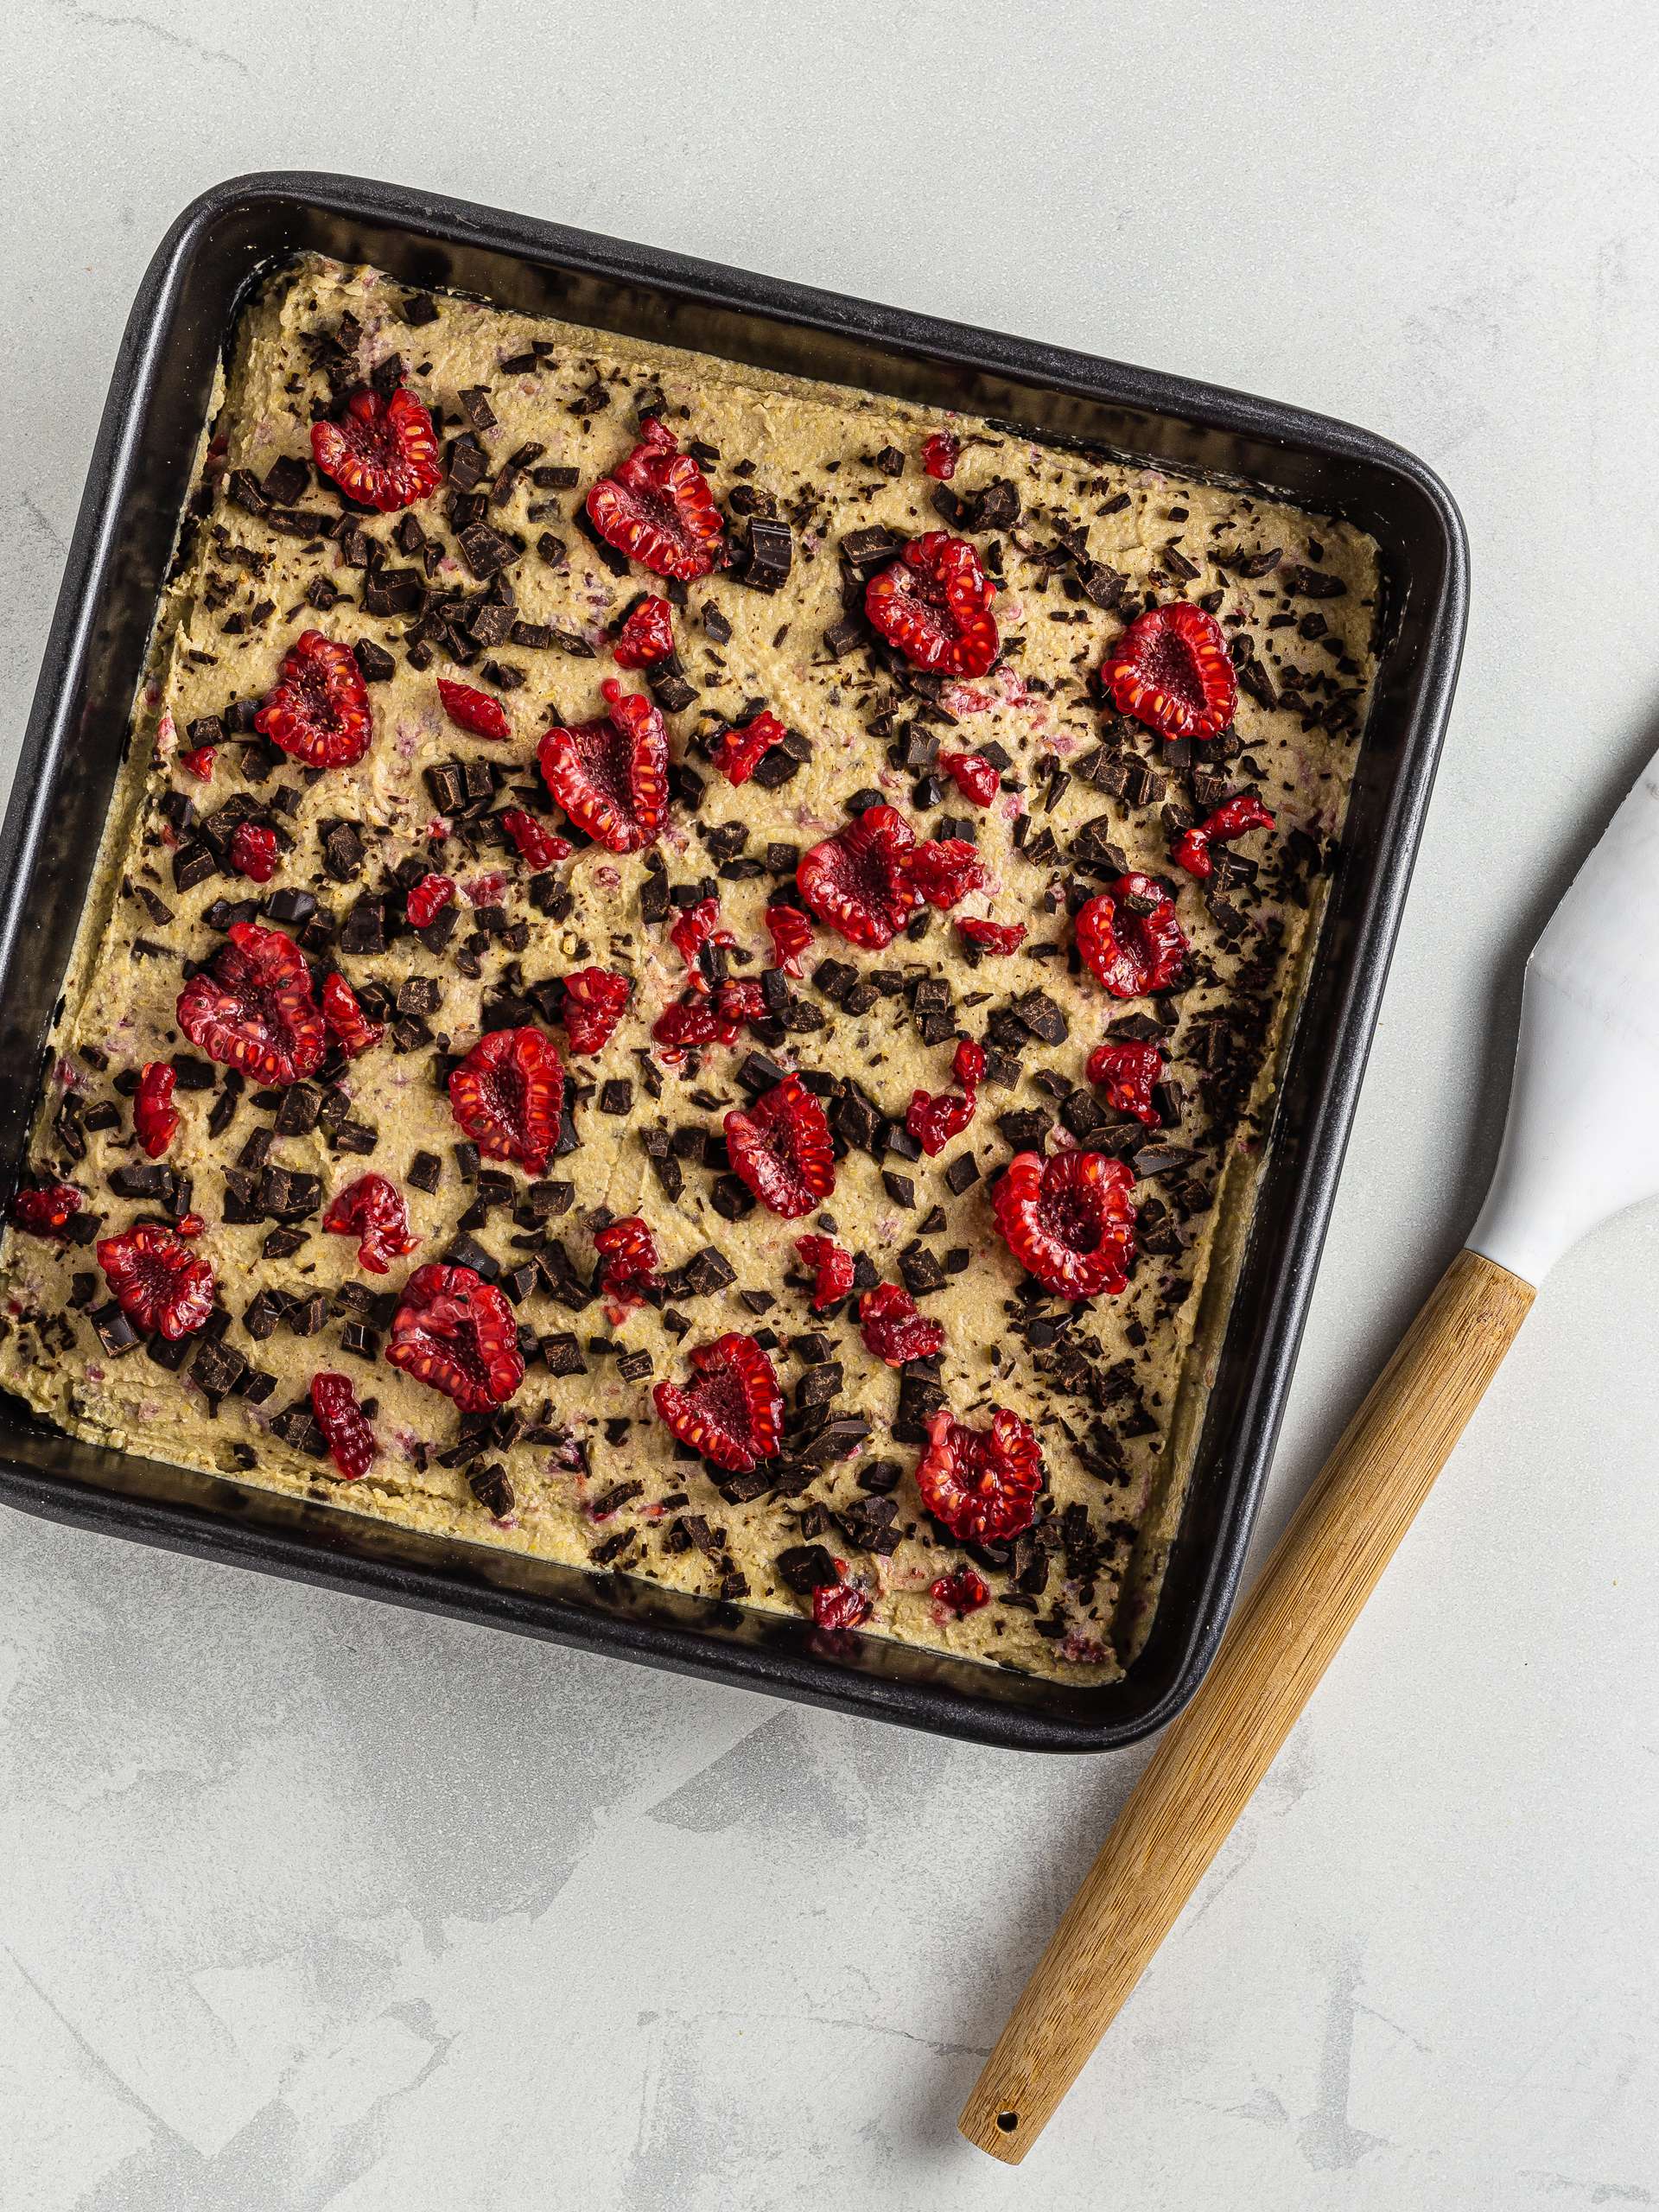 chickpea blondie dough in a square baking tray with raspberries and chocolate chips